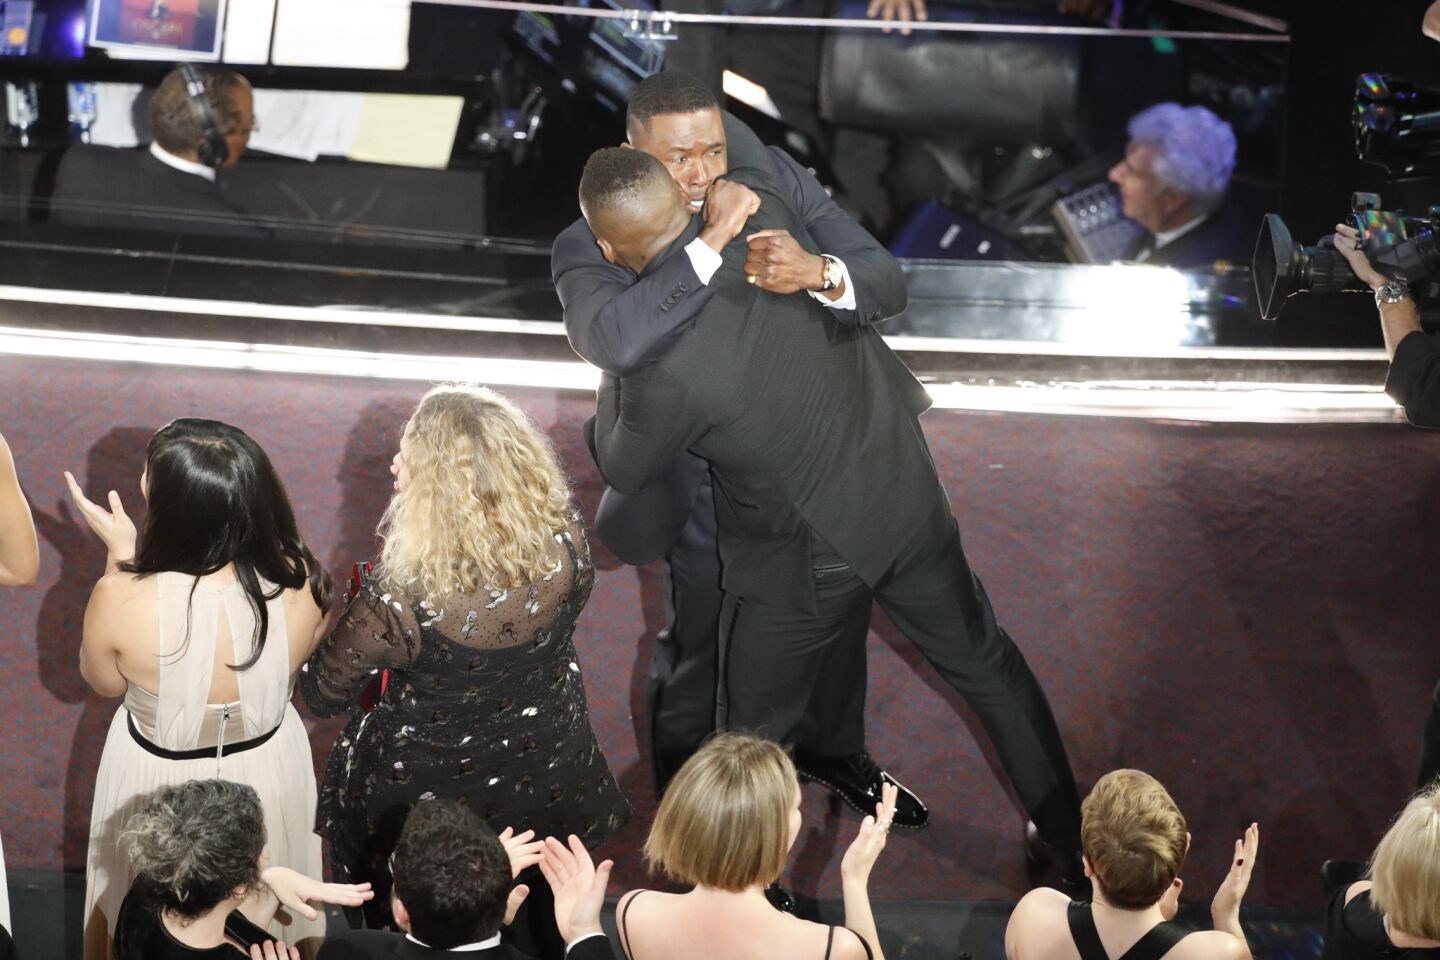 "Moonlight" cast members Mahershala Ali and Trevante Rhodes hug after winning Best Picture for "Moonlight."